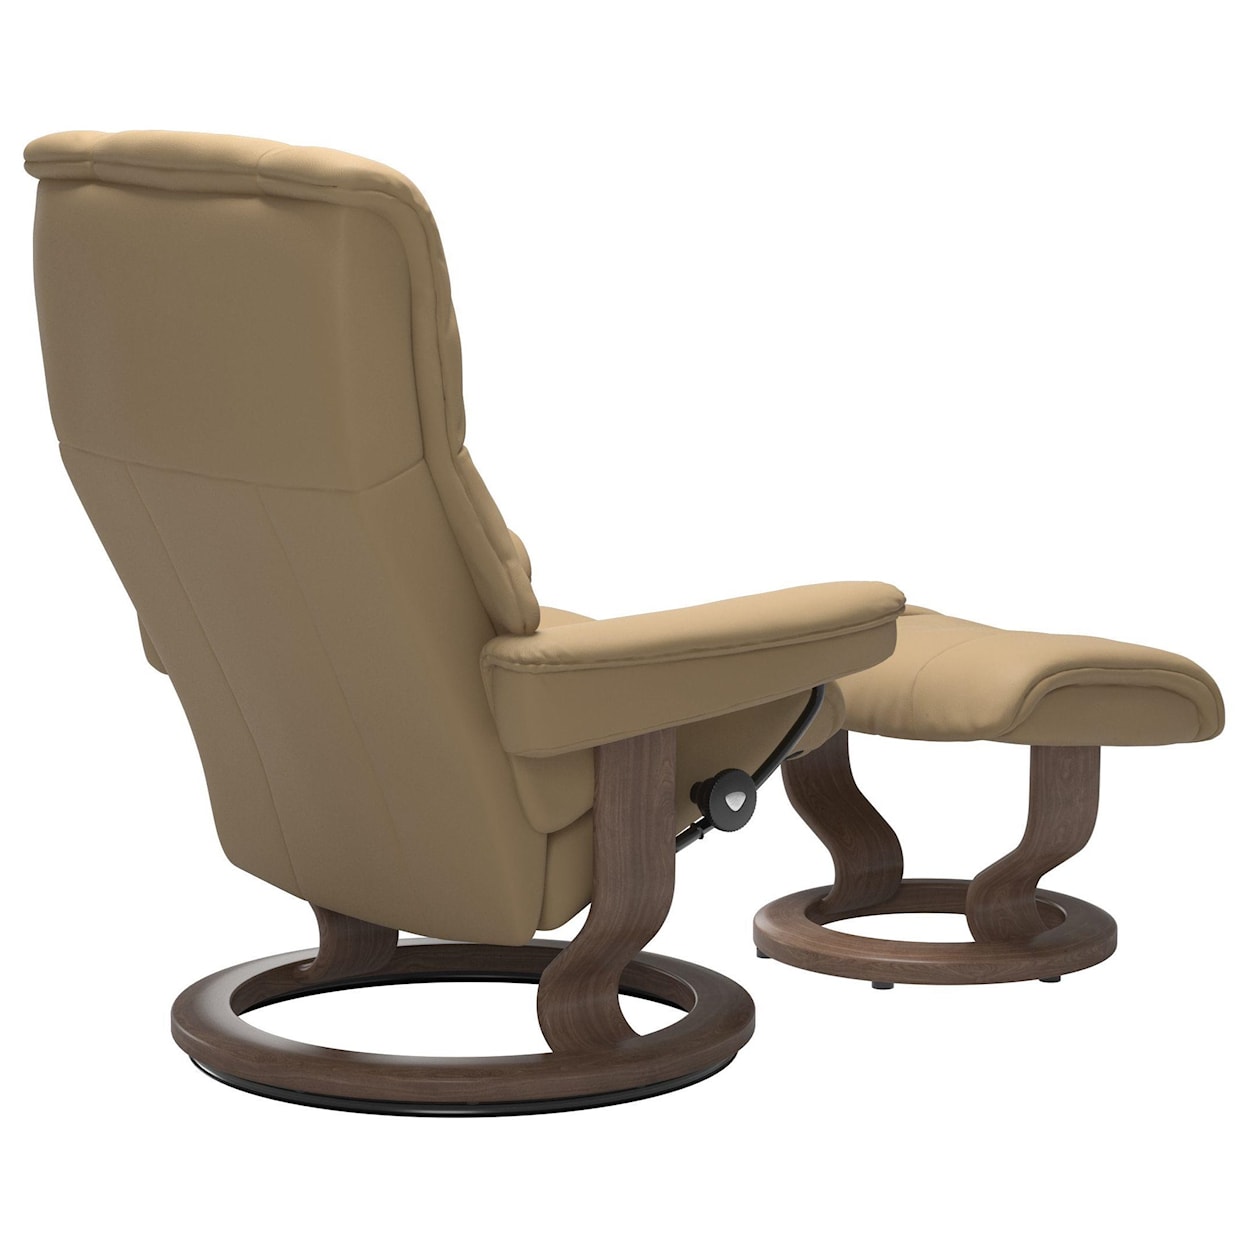 Stressless Mayfair Mayfair (M) in Paloma Sand and Walnut